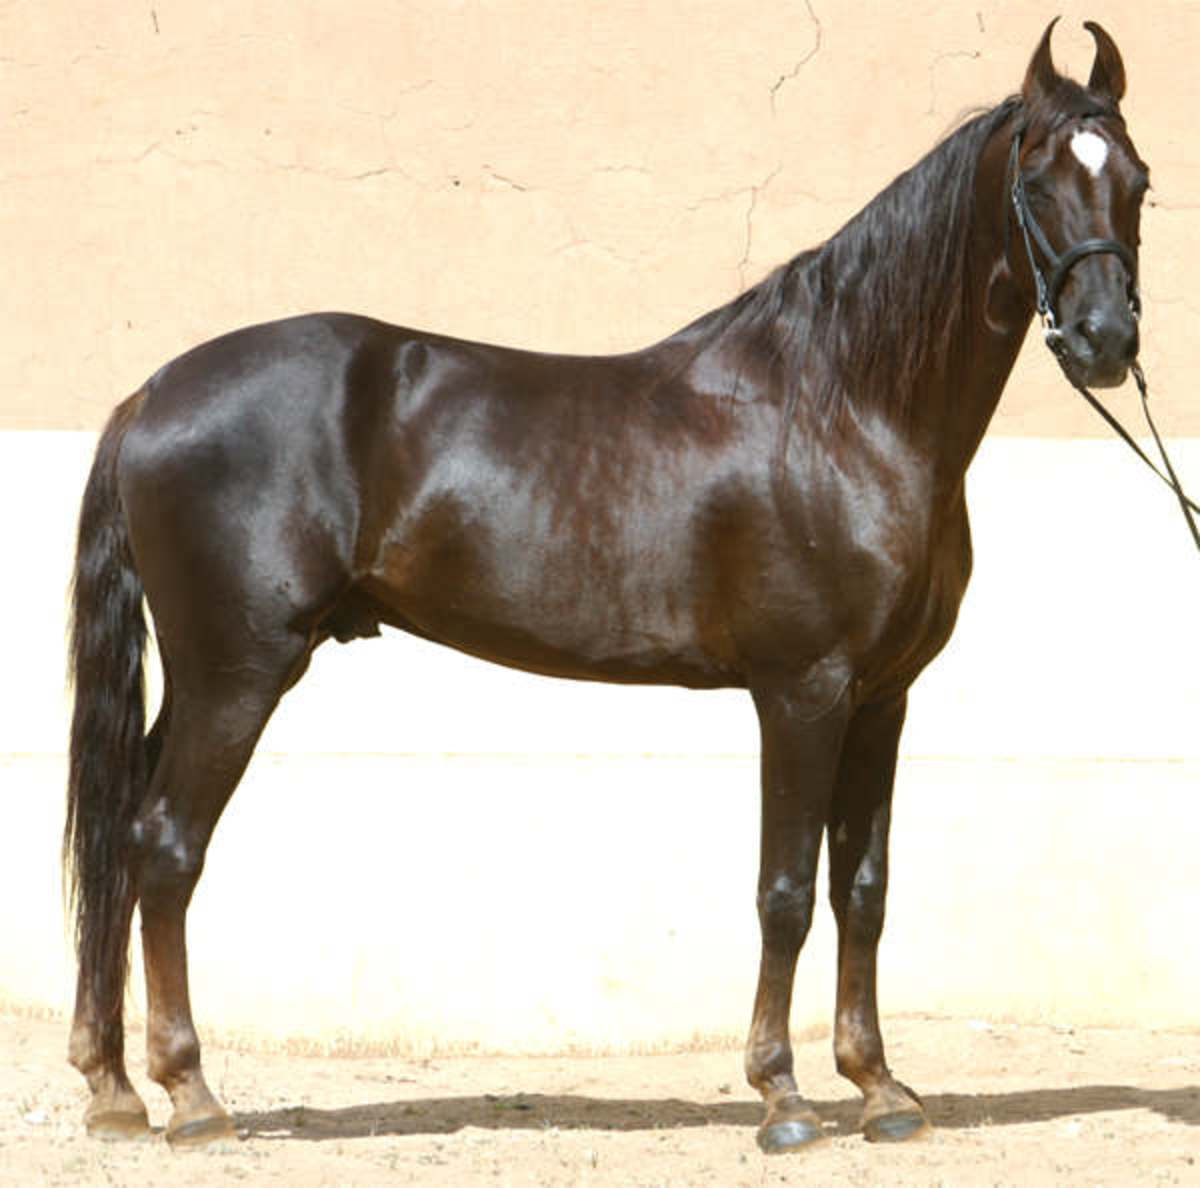 Everything You Want to Know About the Marwari, the Native Horse of India